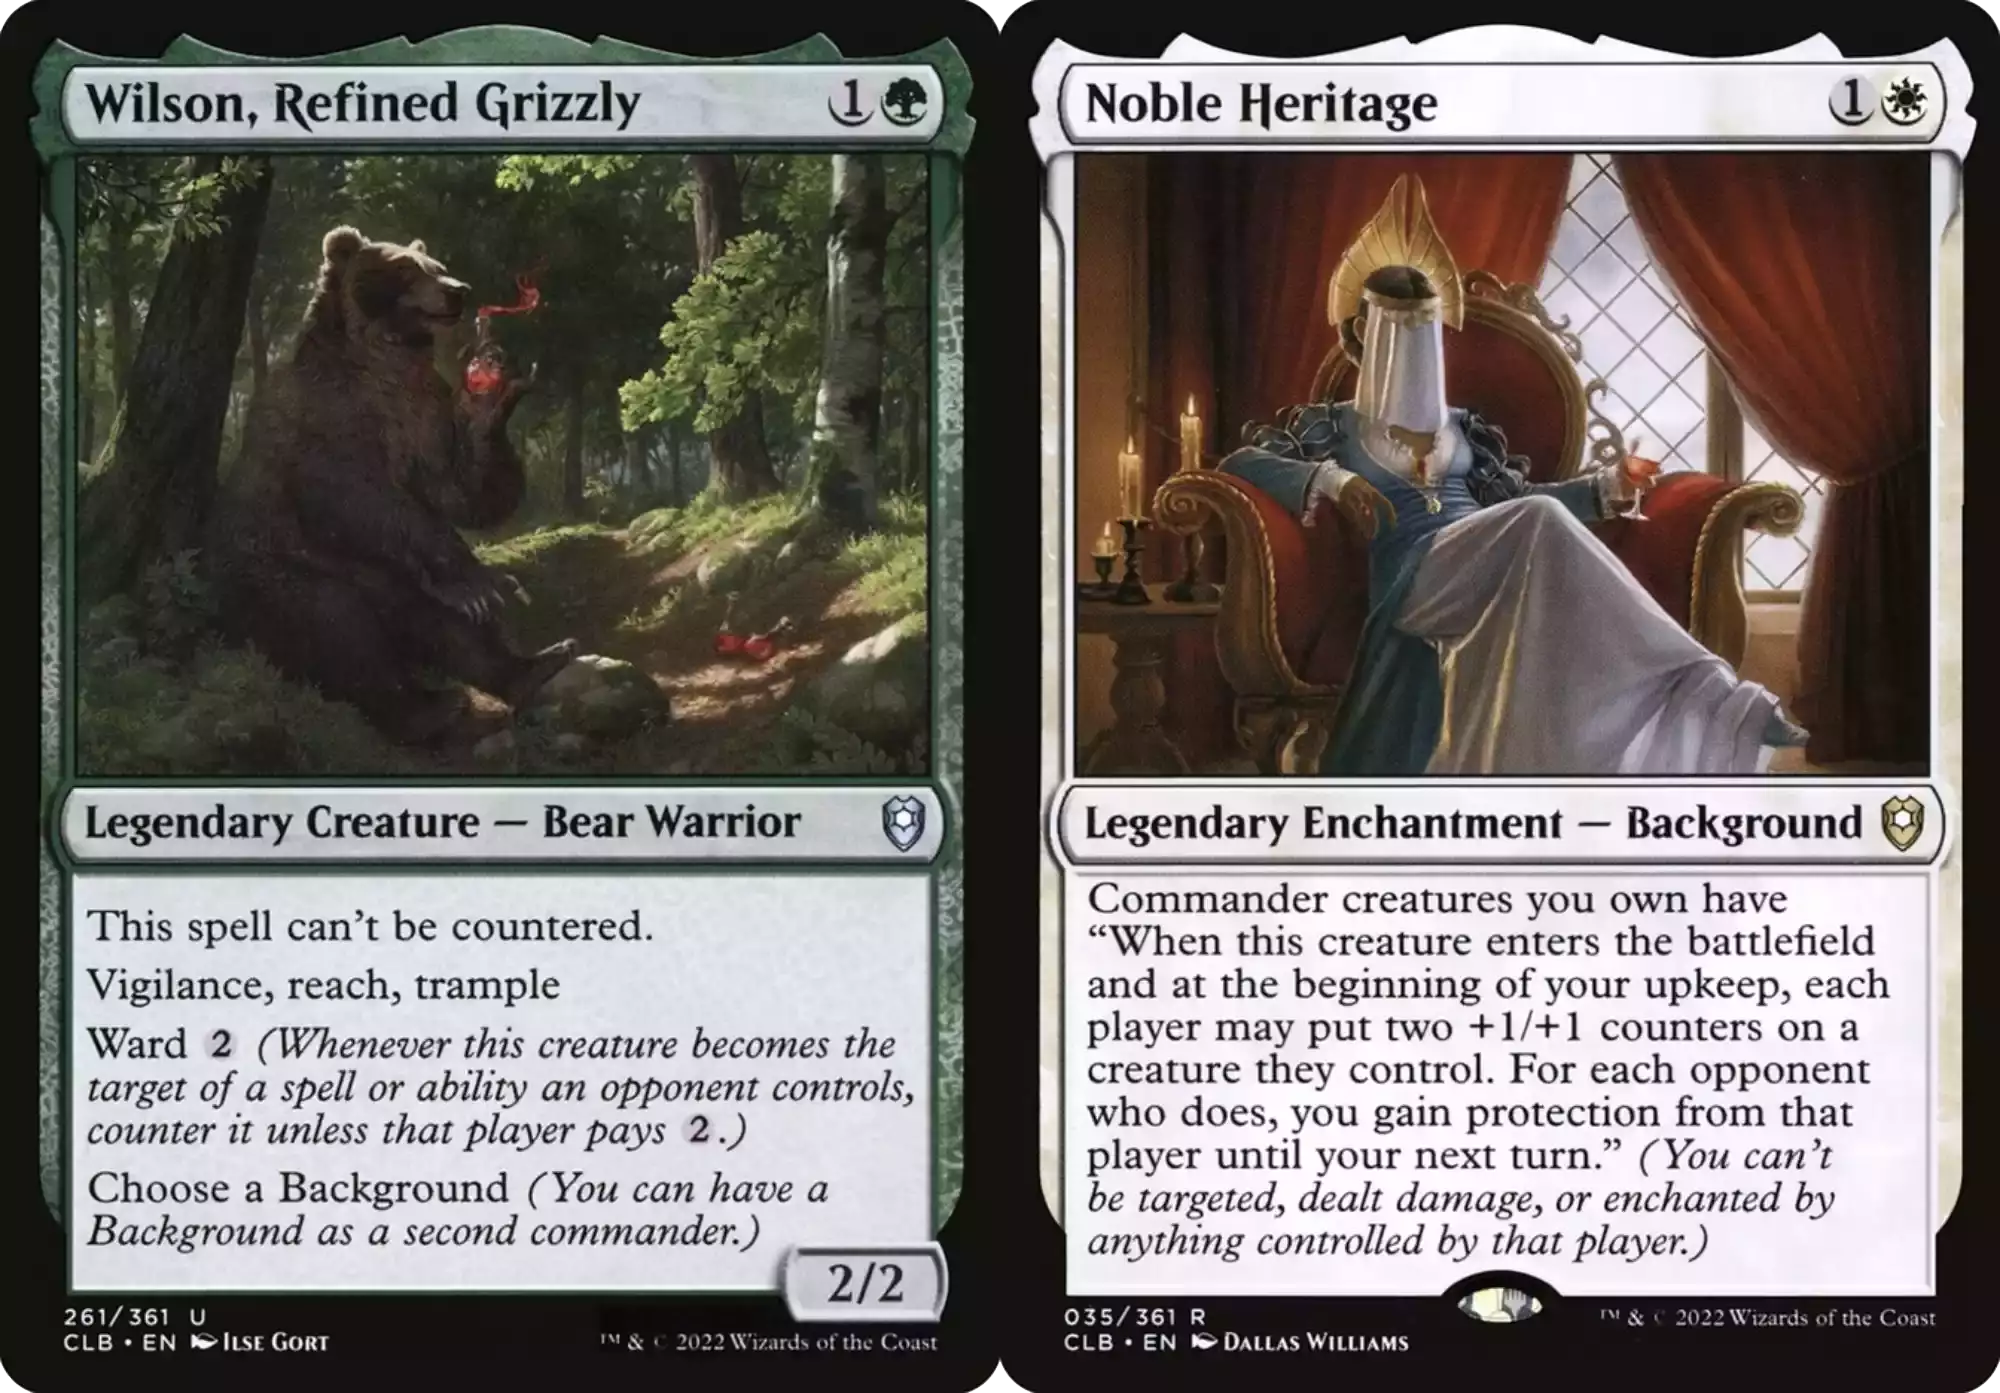 The deck's two commanders: Wilson, Refined Grizzly and Noble Heritage